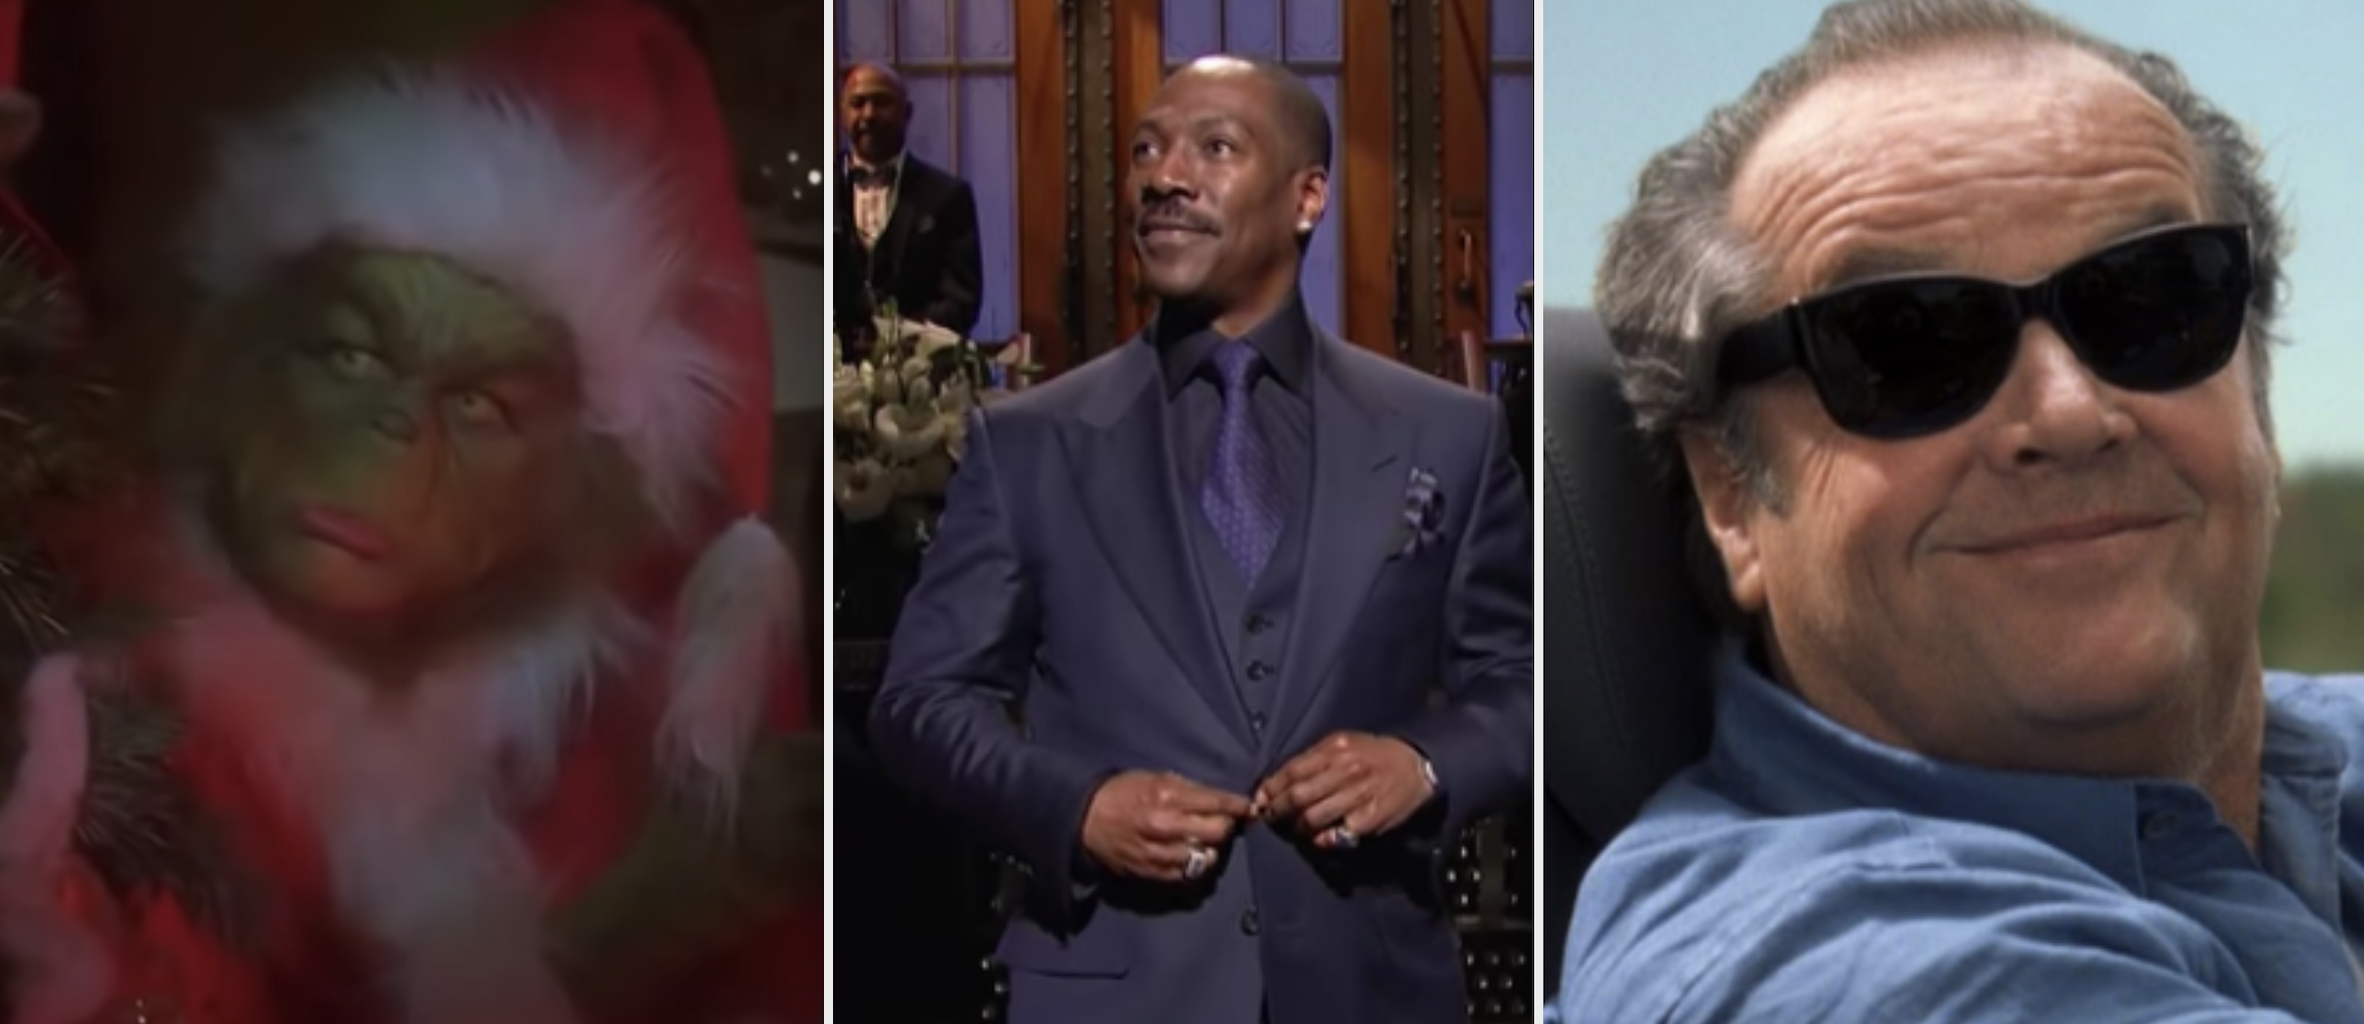 Jim Carrey dressed as the Grinch in a Santa costume, Eddie Murphy during his &quot;SNL&quot; monologue on stage, and Jack Nicholson driving a car in &quot;The Bucket List&quot;